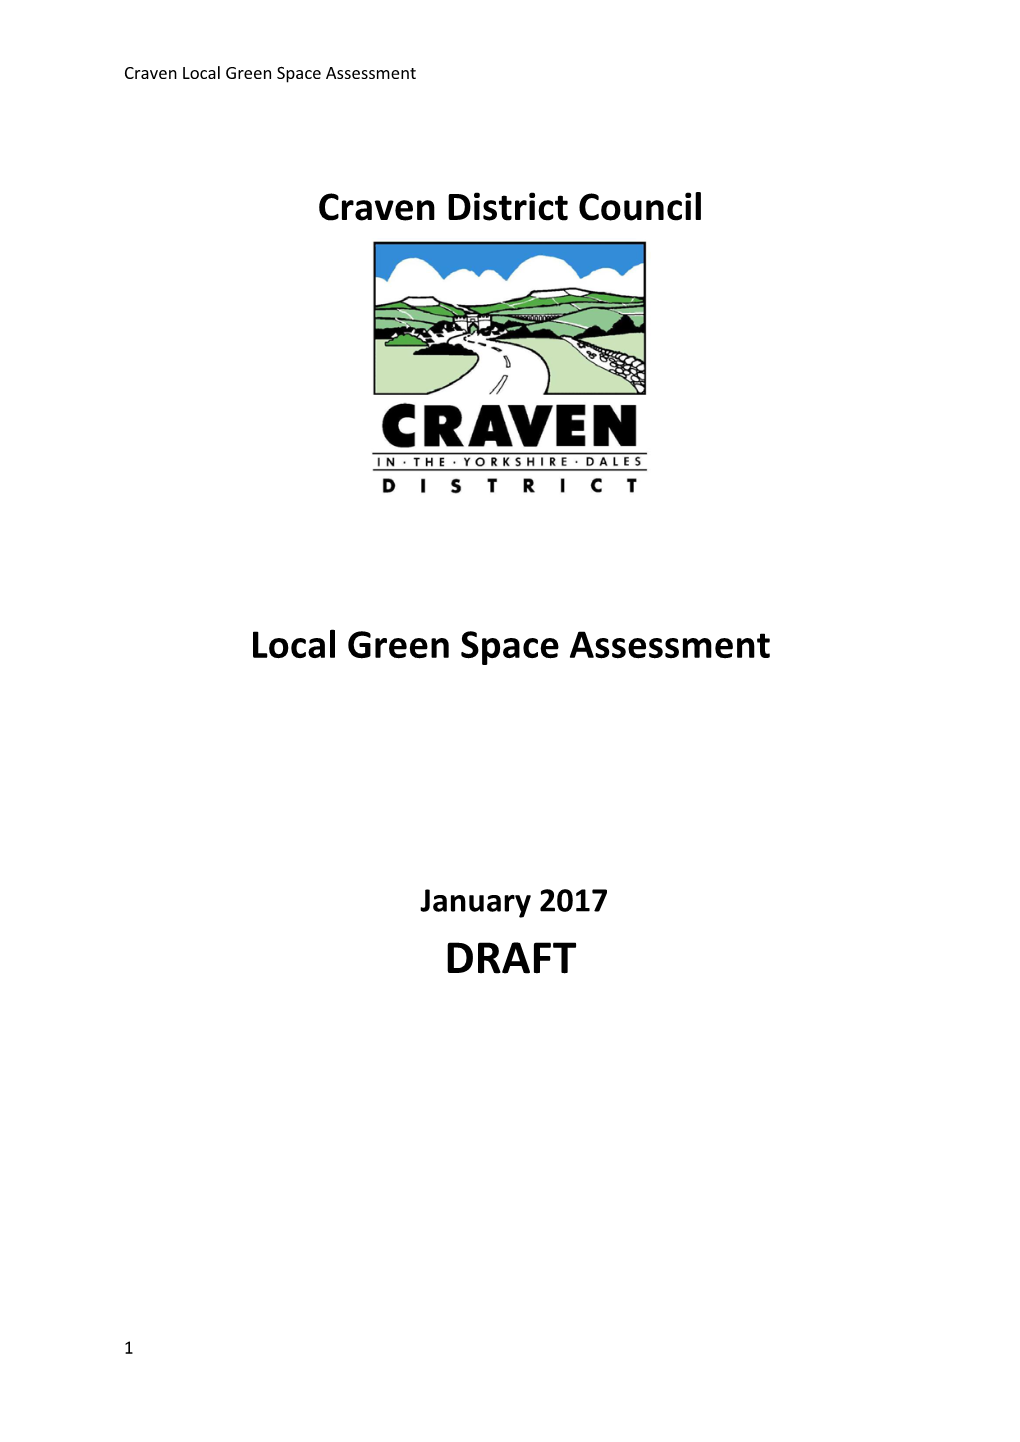 Craven District Council Local Green Space Assessment